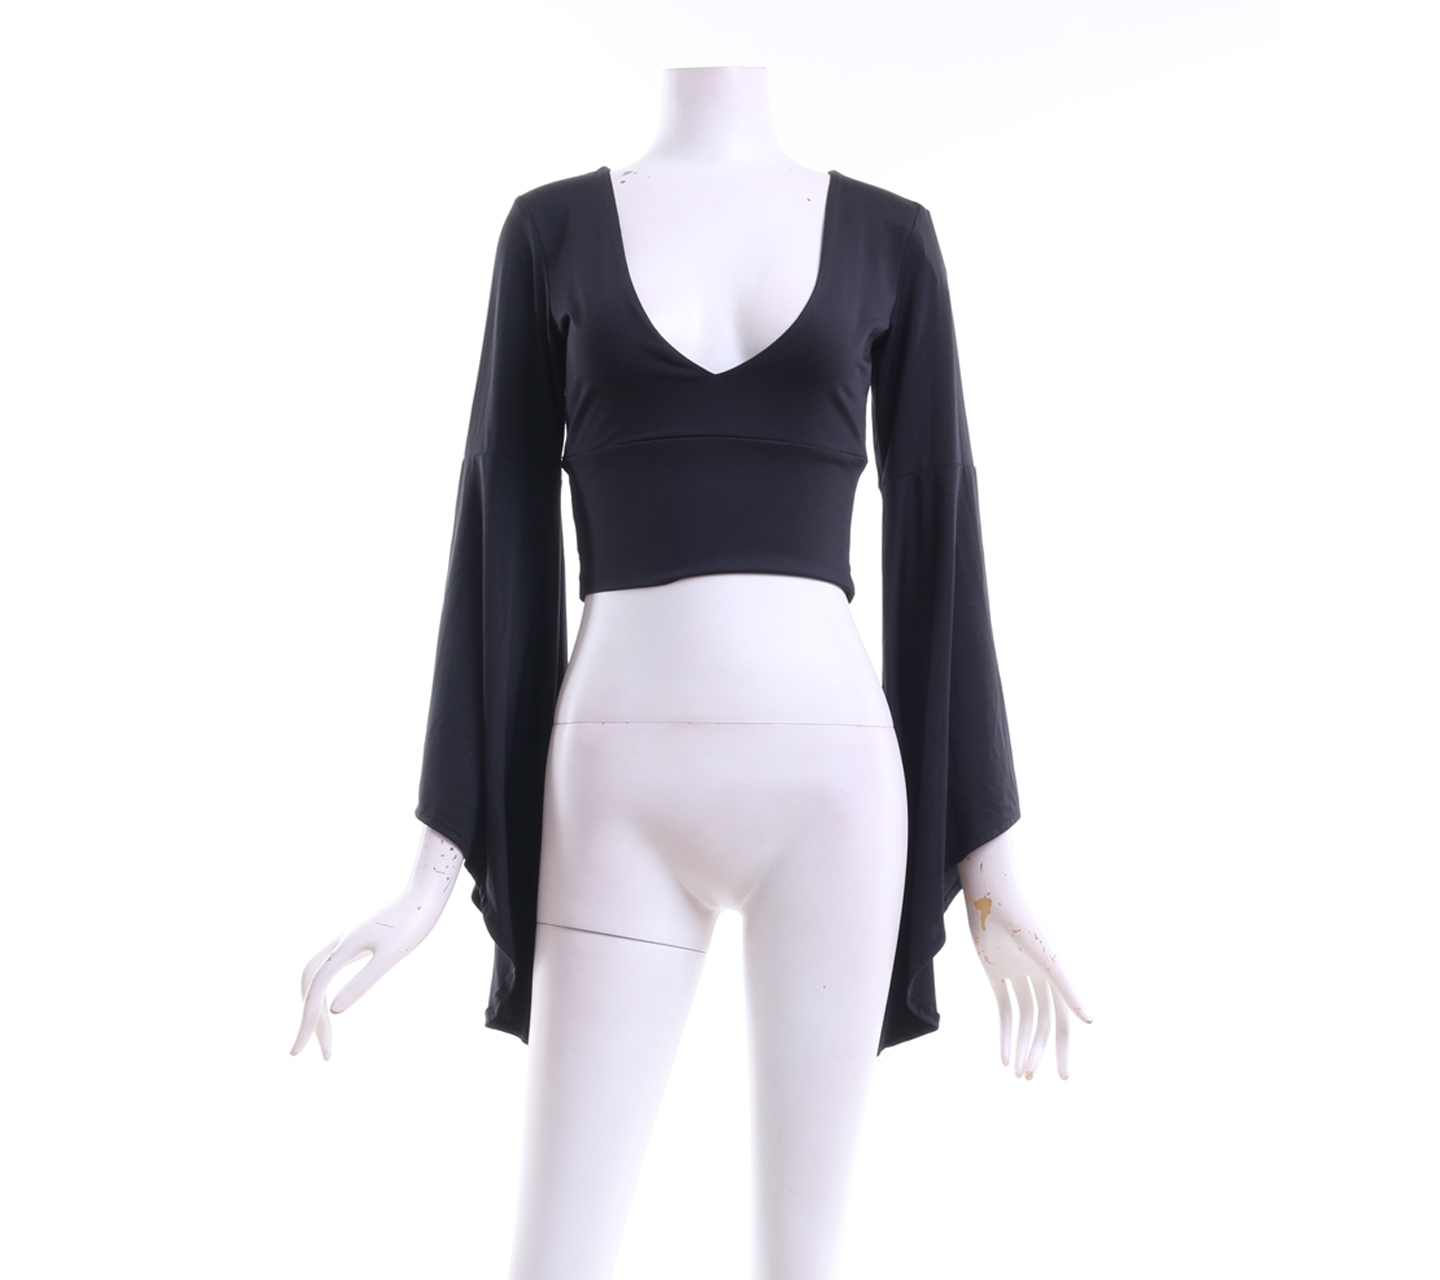 Haoduoyi Black Cropped Blouse